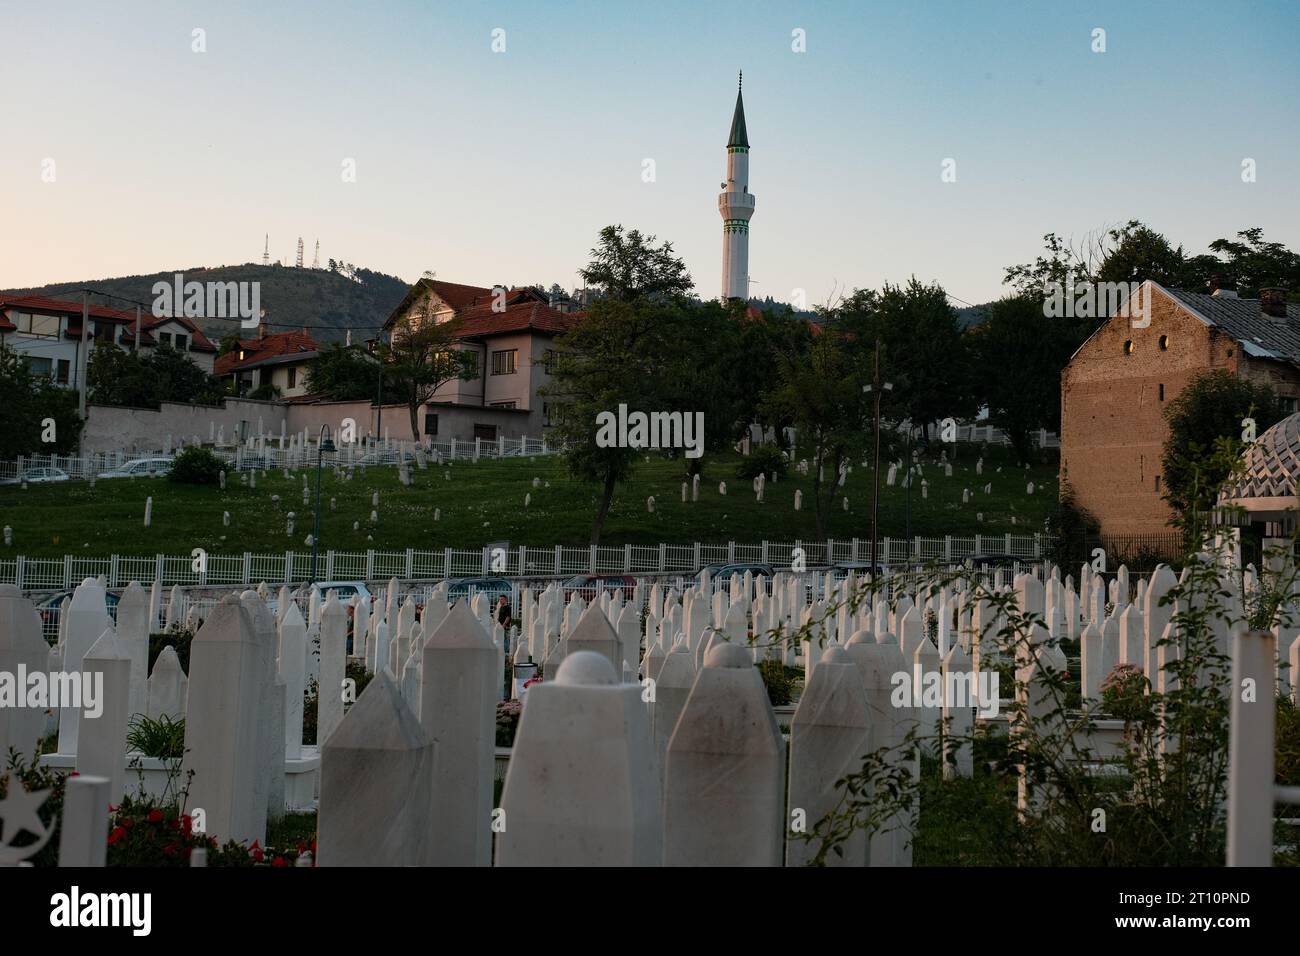 Sarajevo's soldier cemetery at sunset, where a lone soldier's grave, framed by a distant mosque, reflects the harmonious coexistence of history and fa Stock Photo